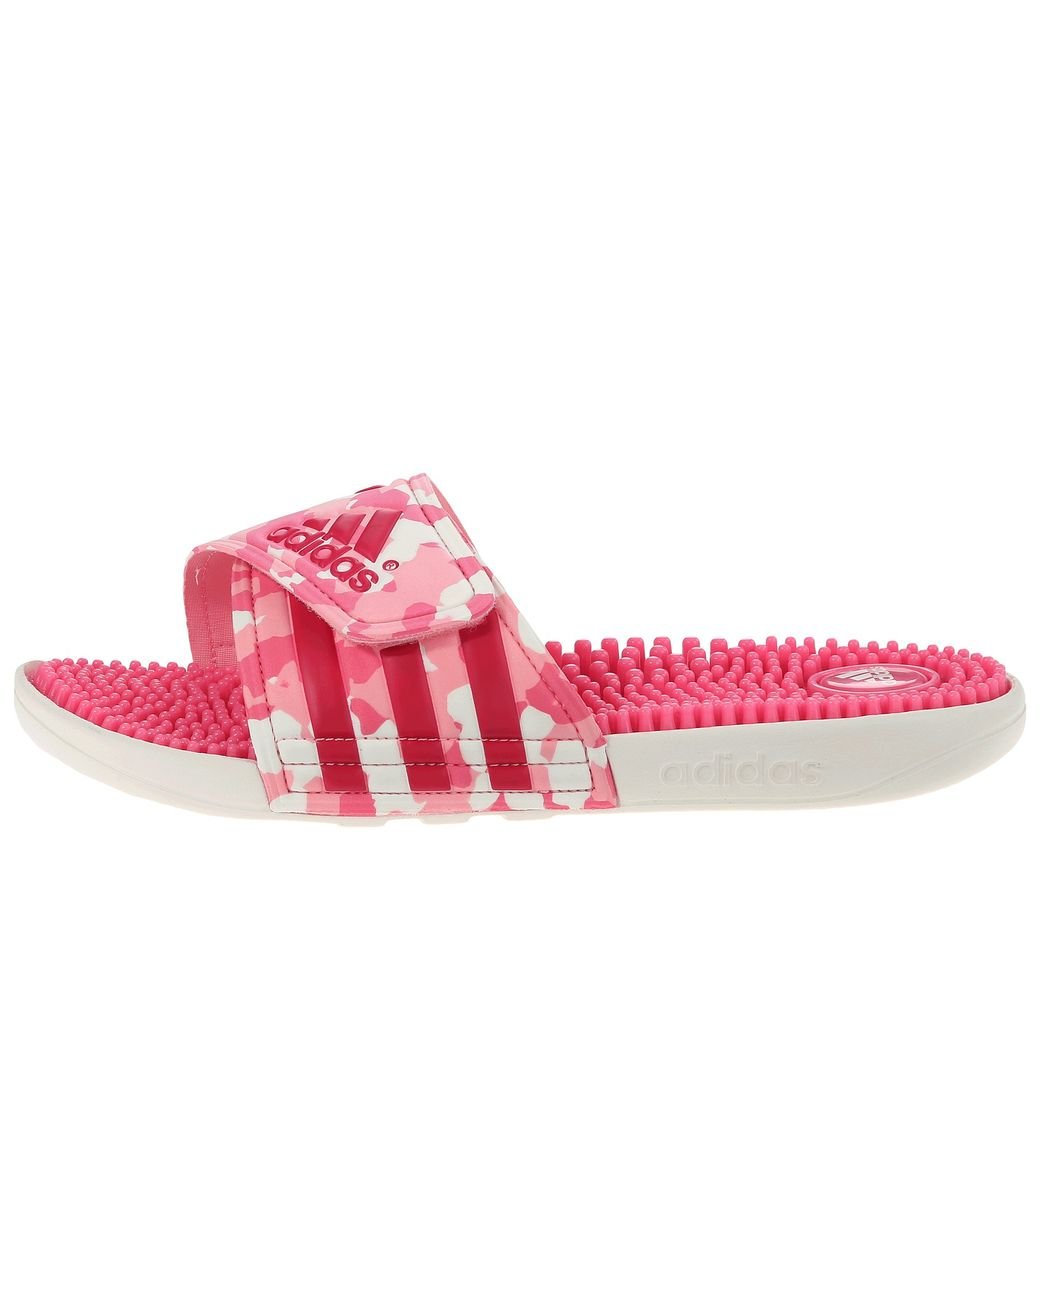 adidas Adissage Graphic in Pink | Lyst